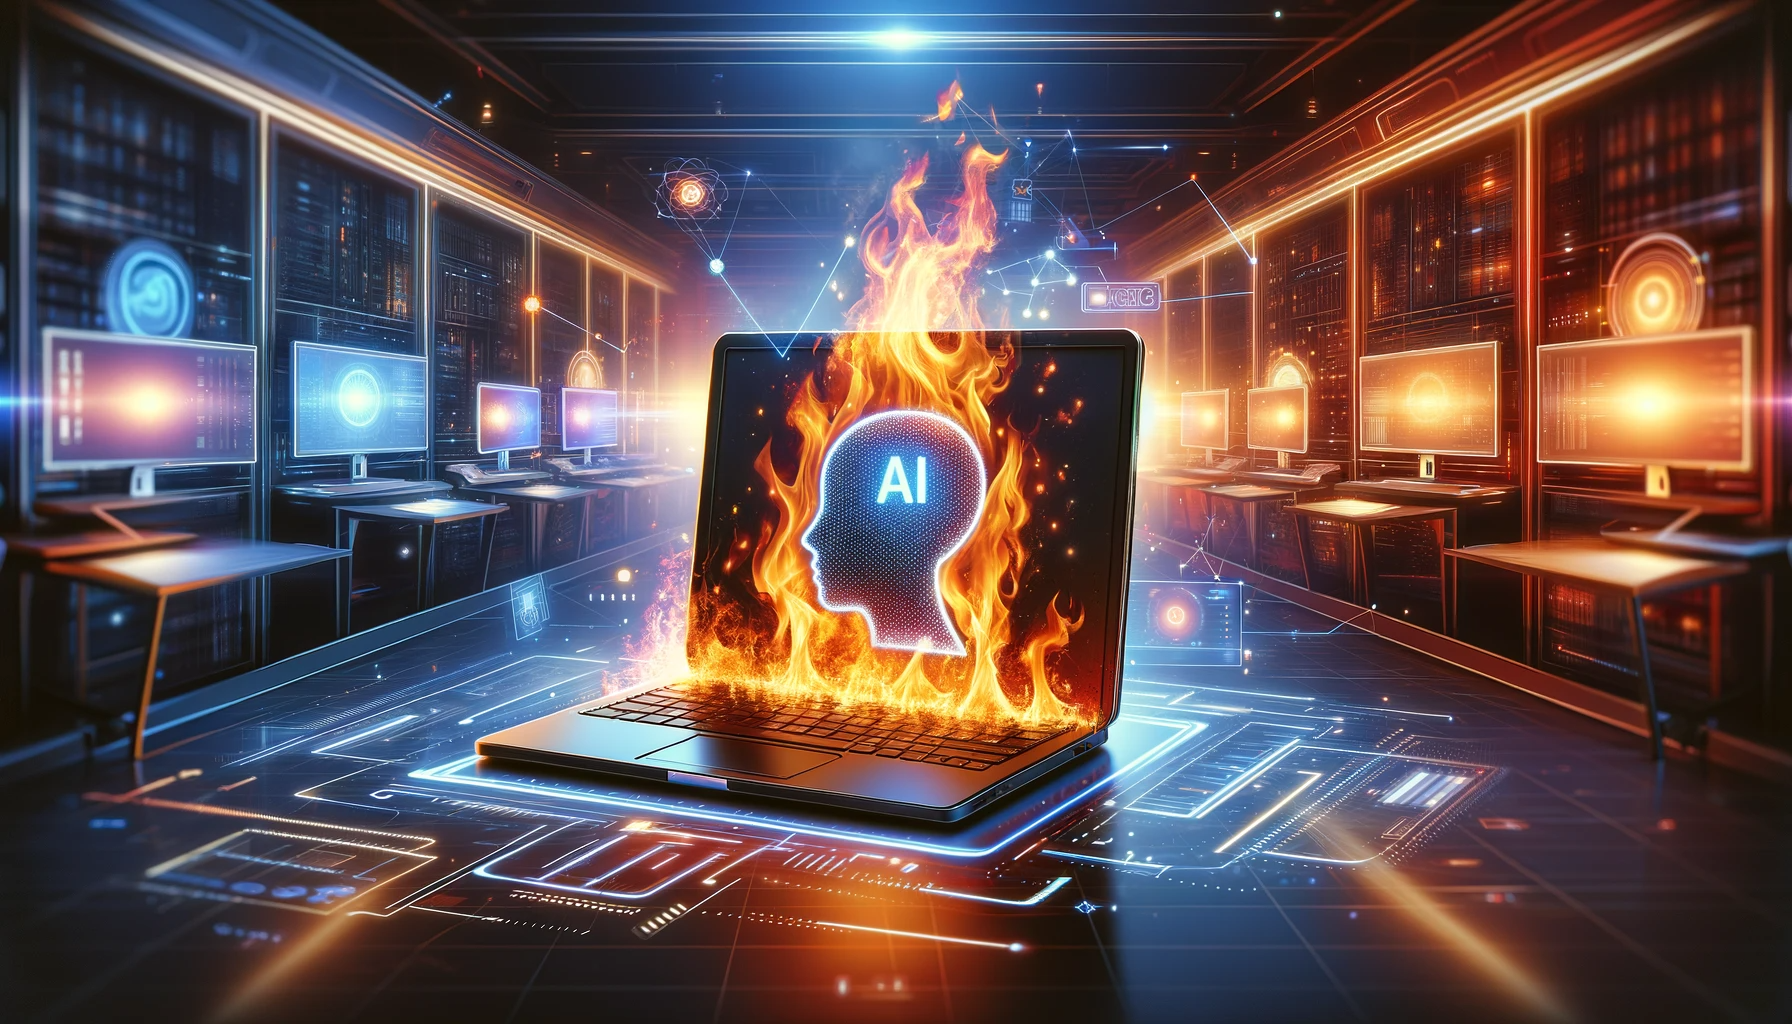 DALL·E 2024-02-01 14.04.04 - 1. A burning laptop in a futuristic background, symbolizing that AI technology is the new hot trend. The image shows the laptop with flames and glowin